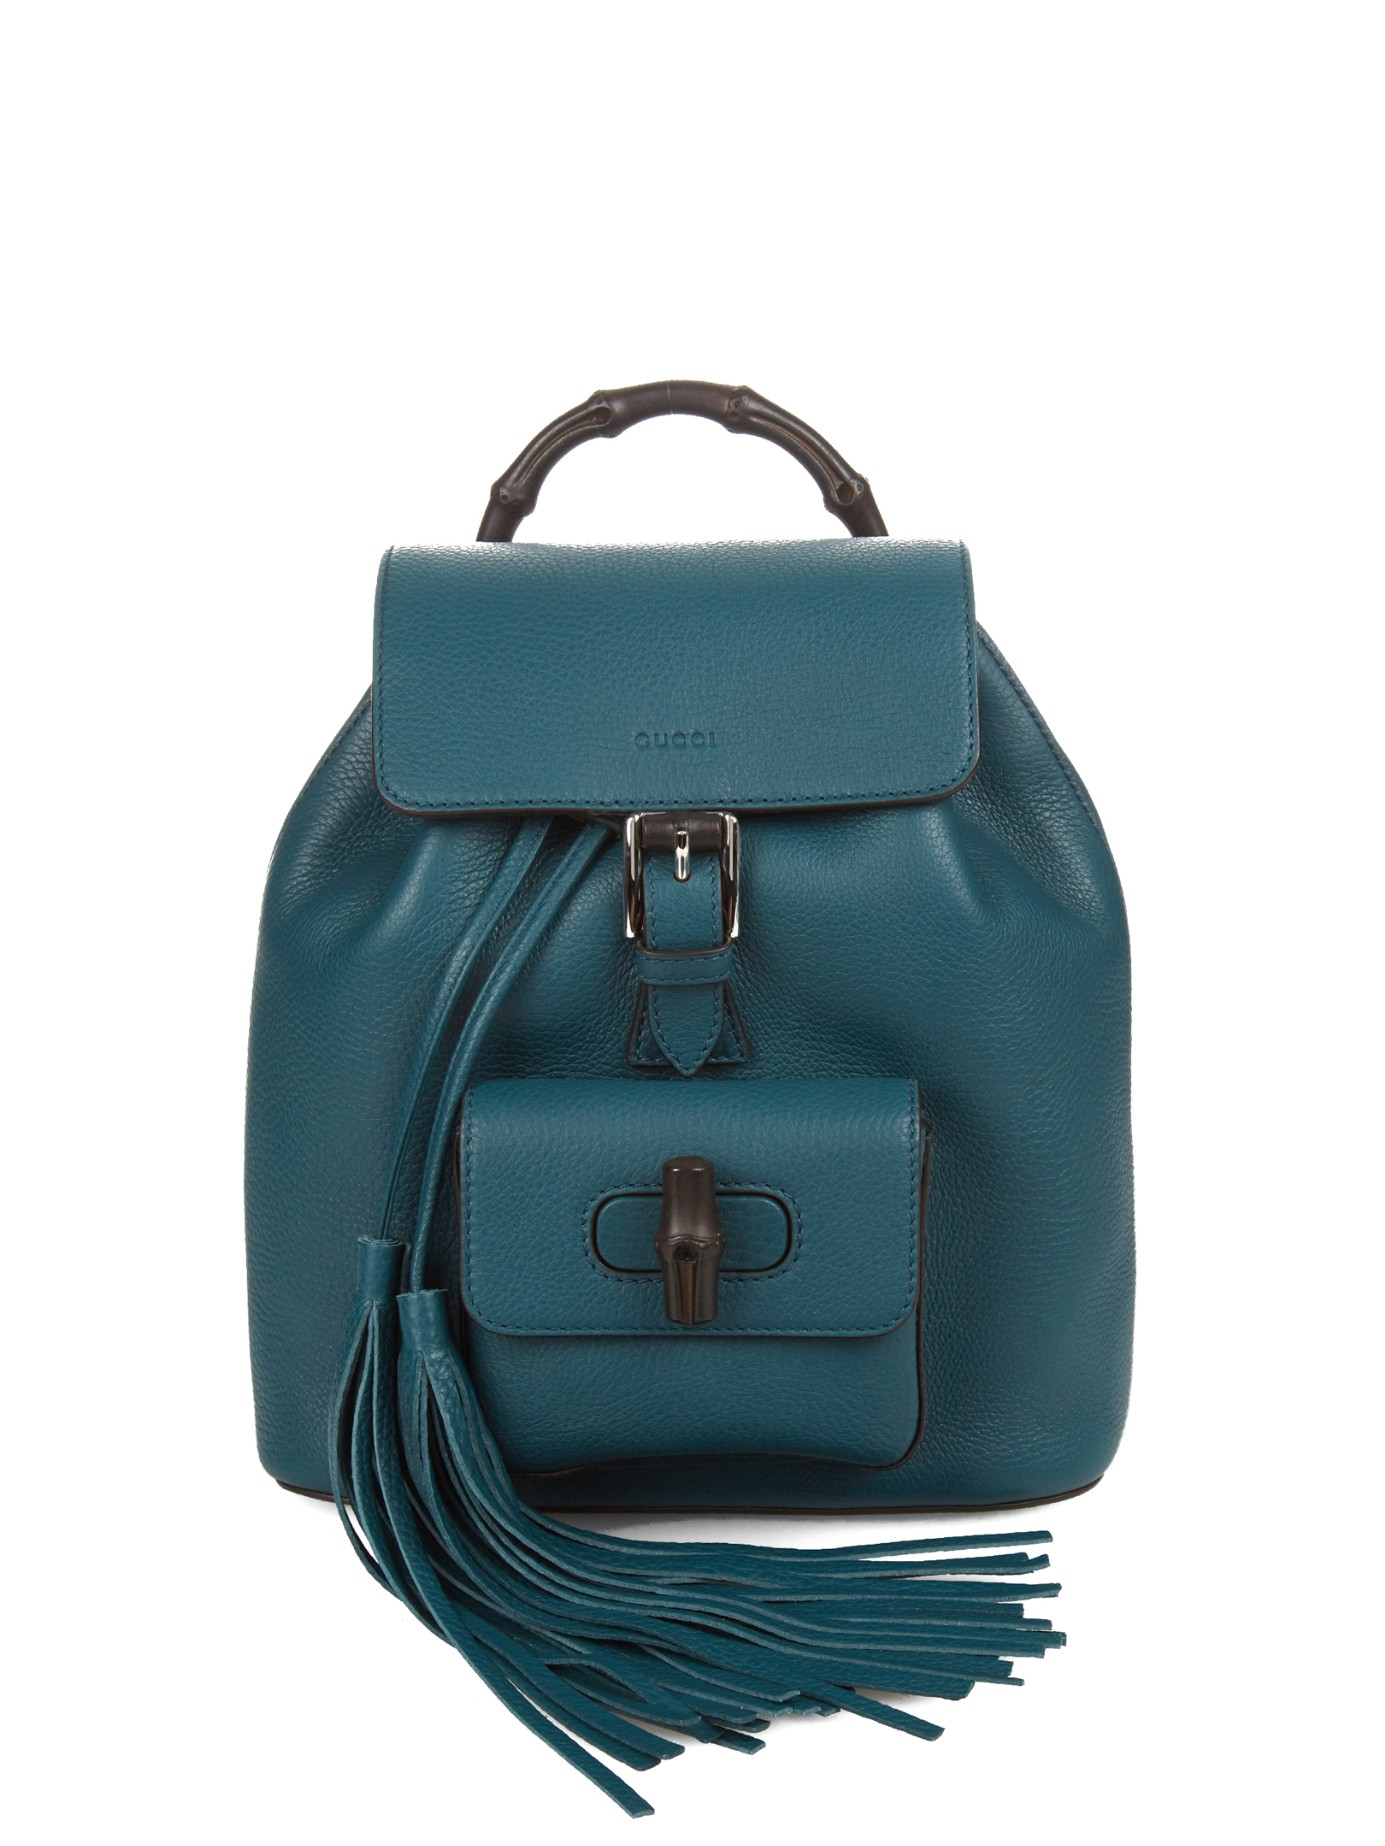 Gucci Bamboo Mini Leather Backpack in Green - Lyst